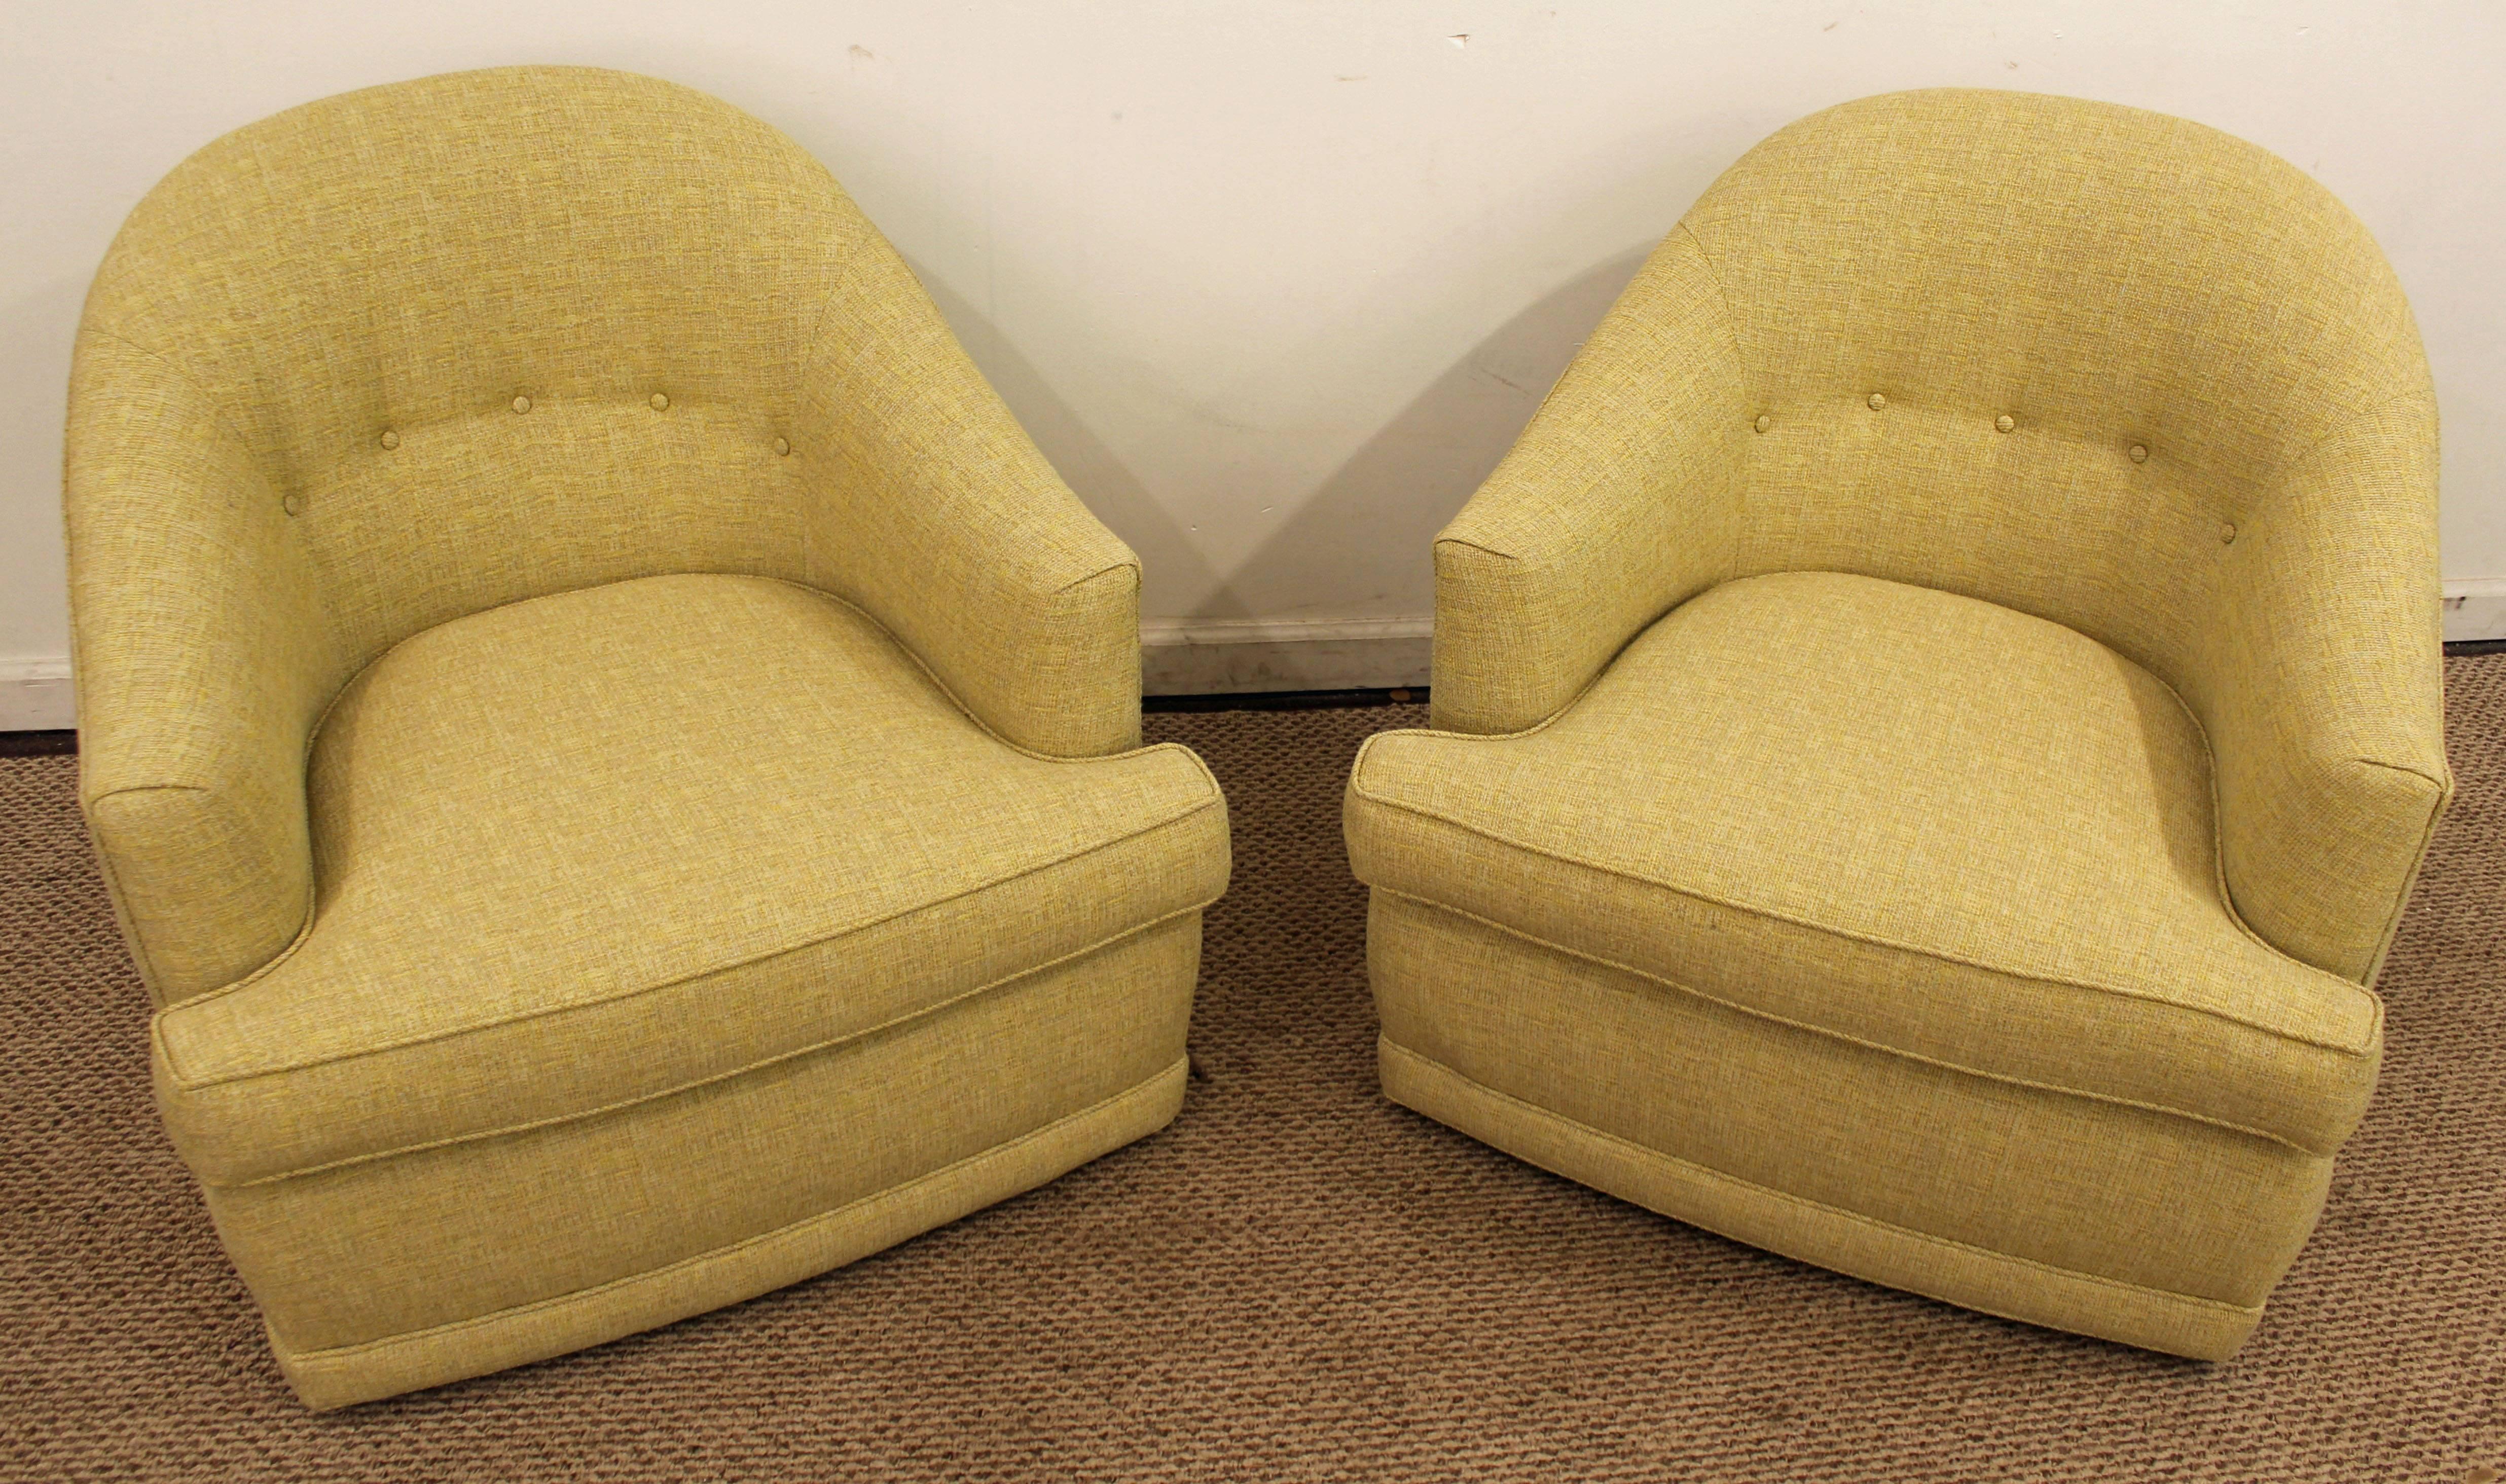 The chairs are freshly upholstered with custom fabric. The color is 